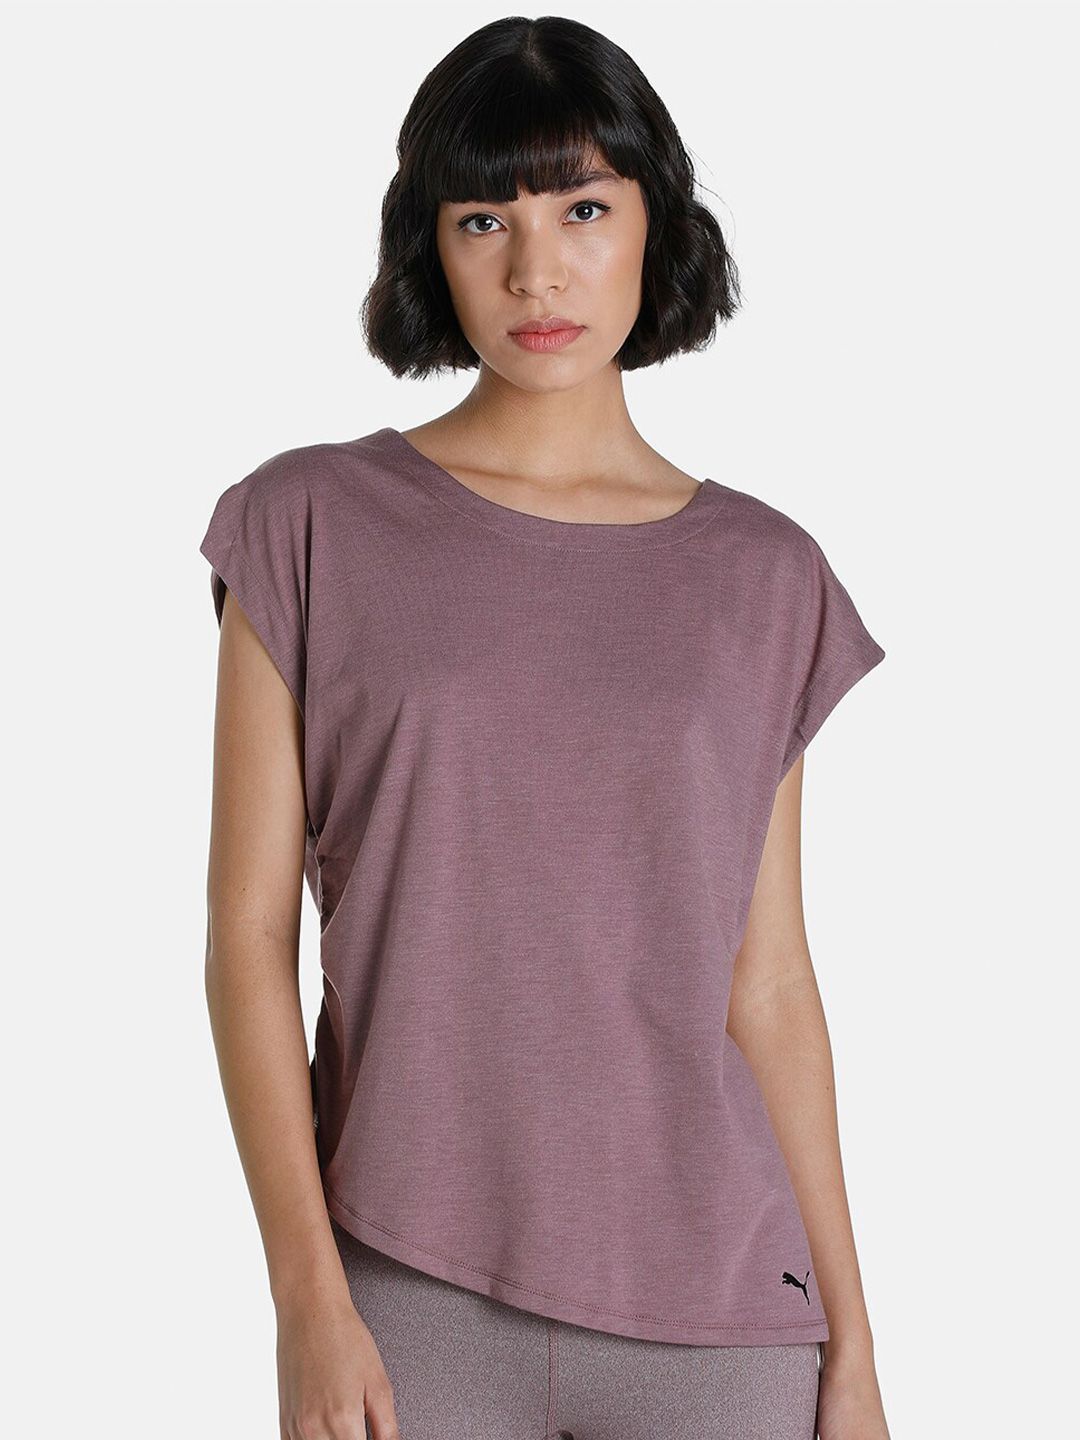 Puma Women Mauve Solid  Extended Sleeves Training T-shirt Price in India